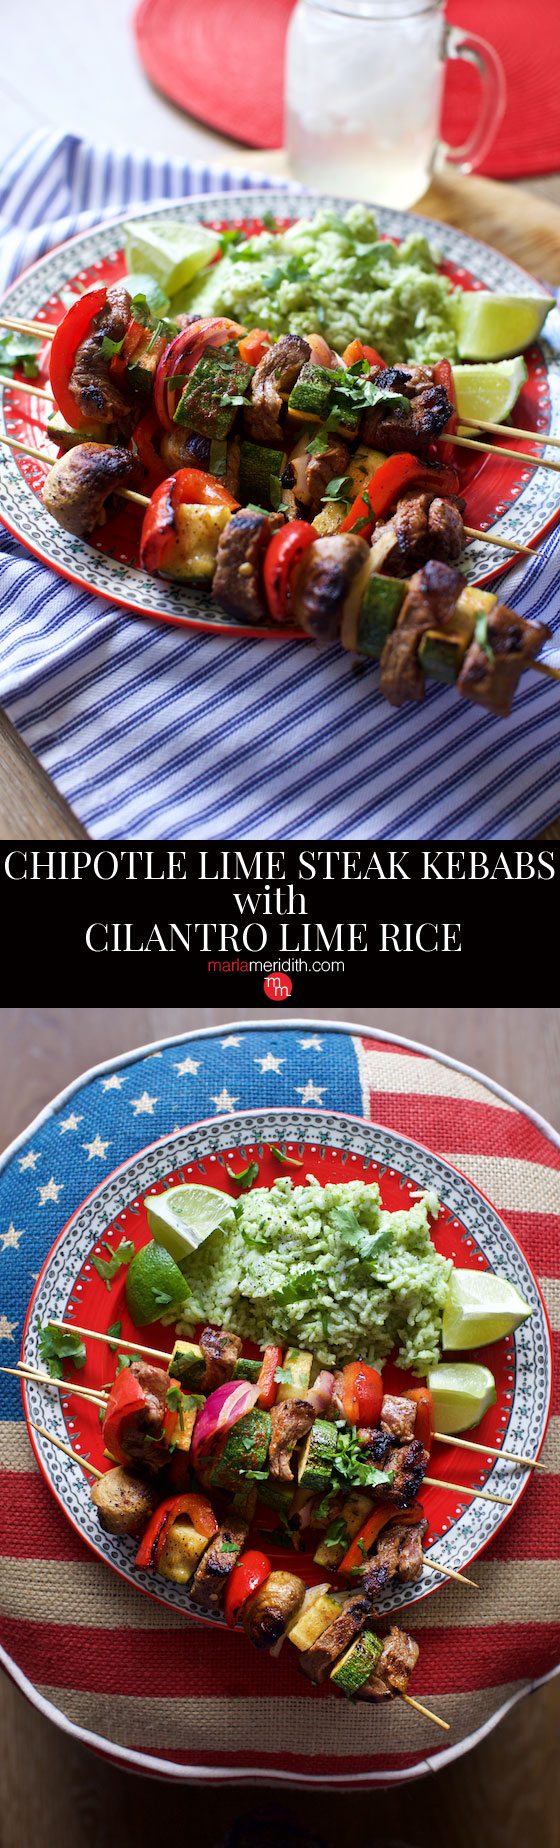 Chipotle Lime Steak Kebabs with Cilantro Lime Rice recipes. Great for weeknights and summer parties! MarlaMeridith.com ( @marlameridith )